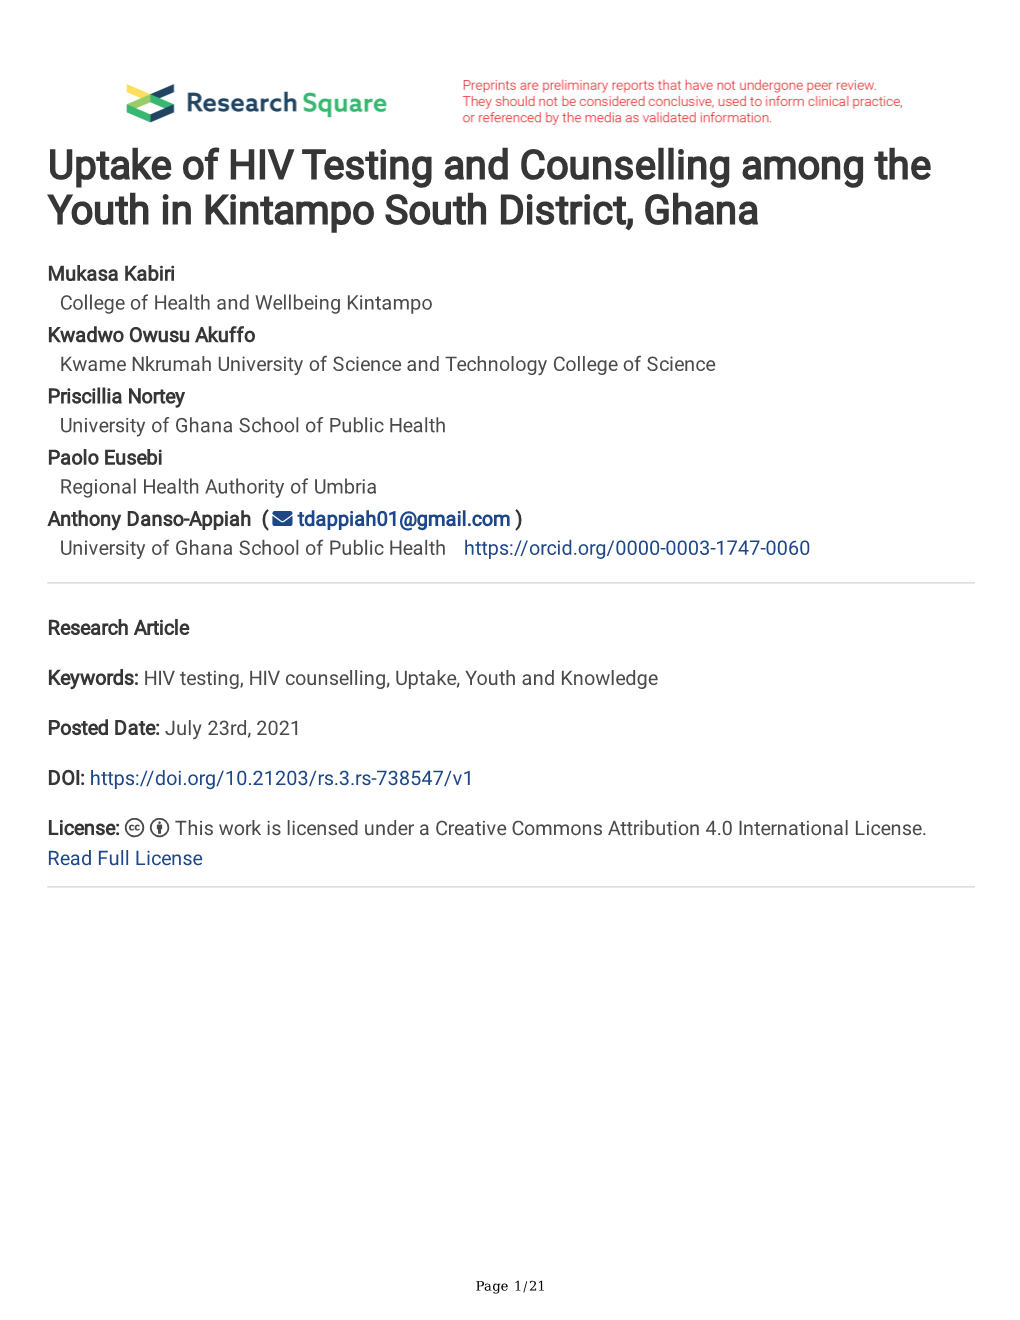 Uptake of HIV Testing and Counselling Among the Youth in Kintampo South District, Ghana